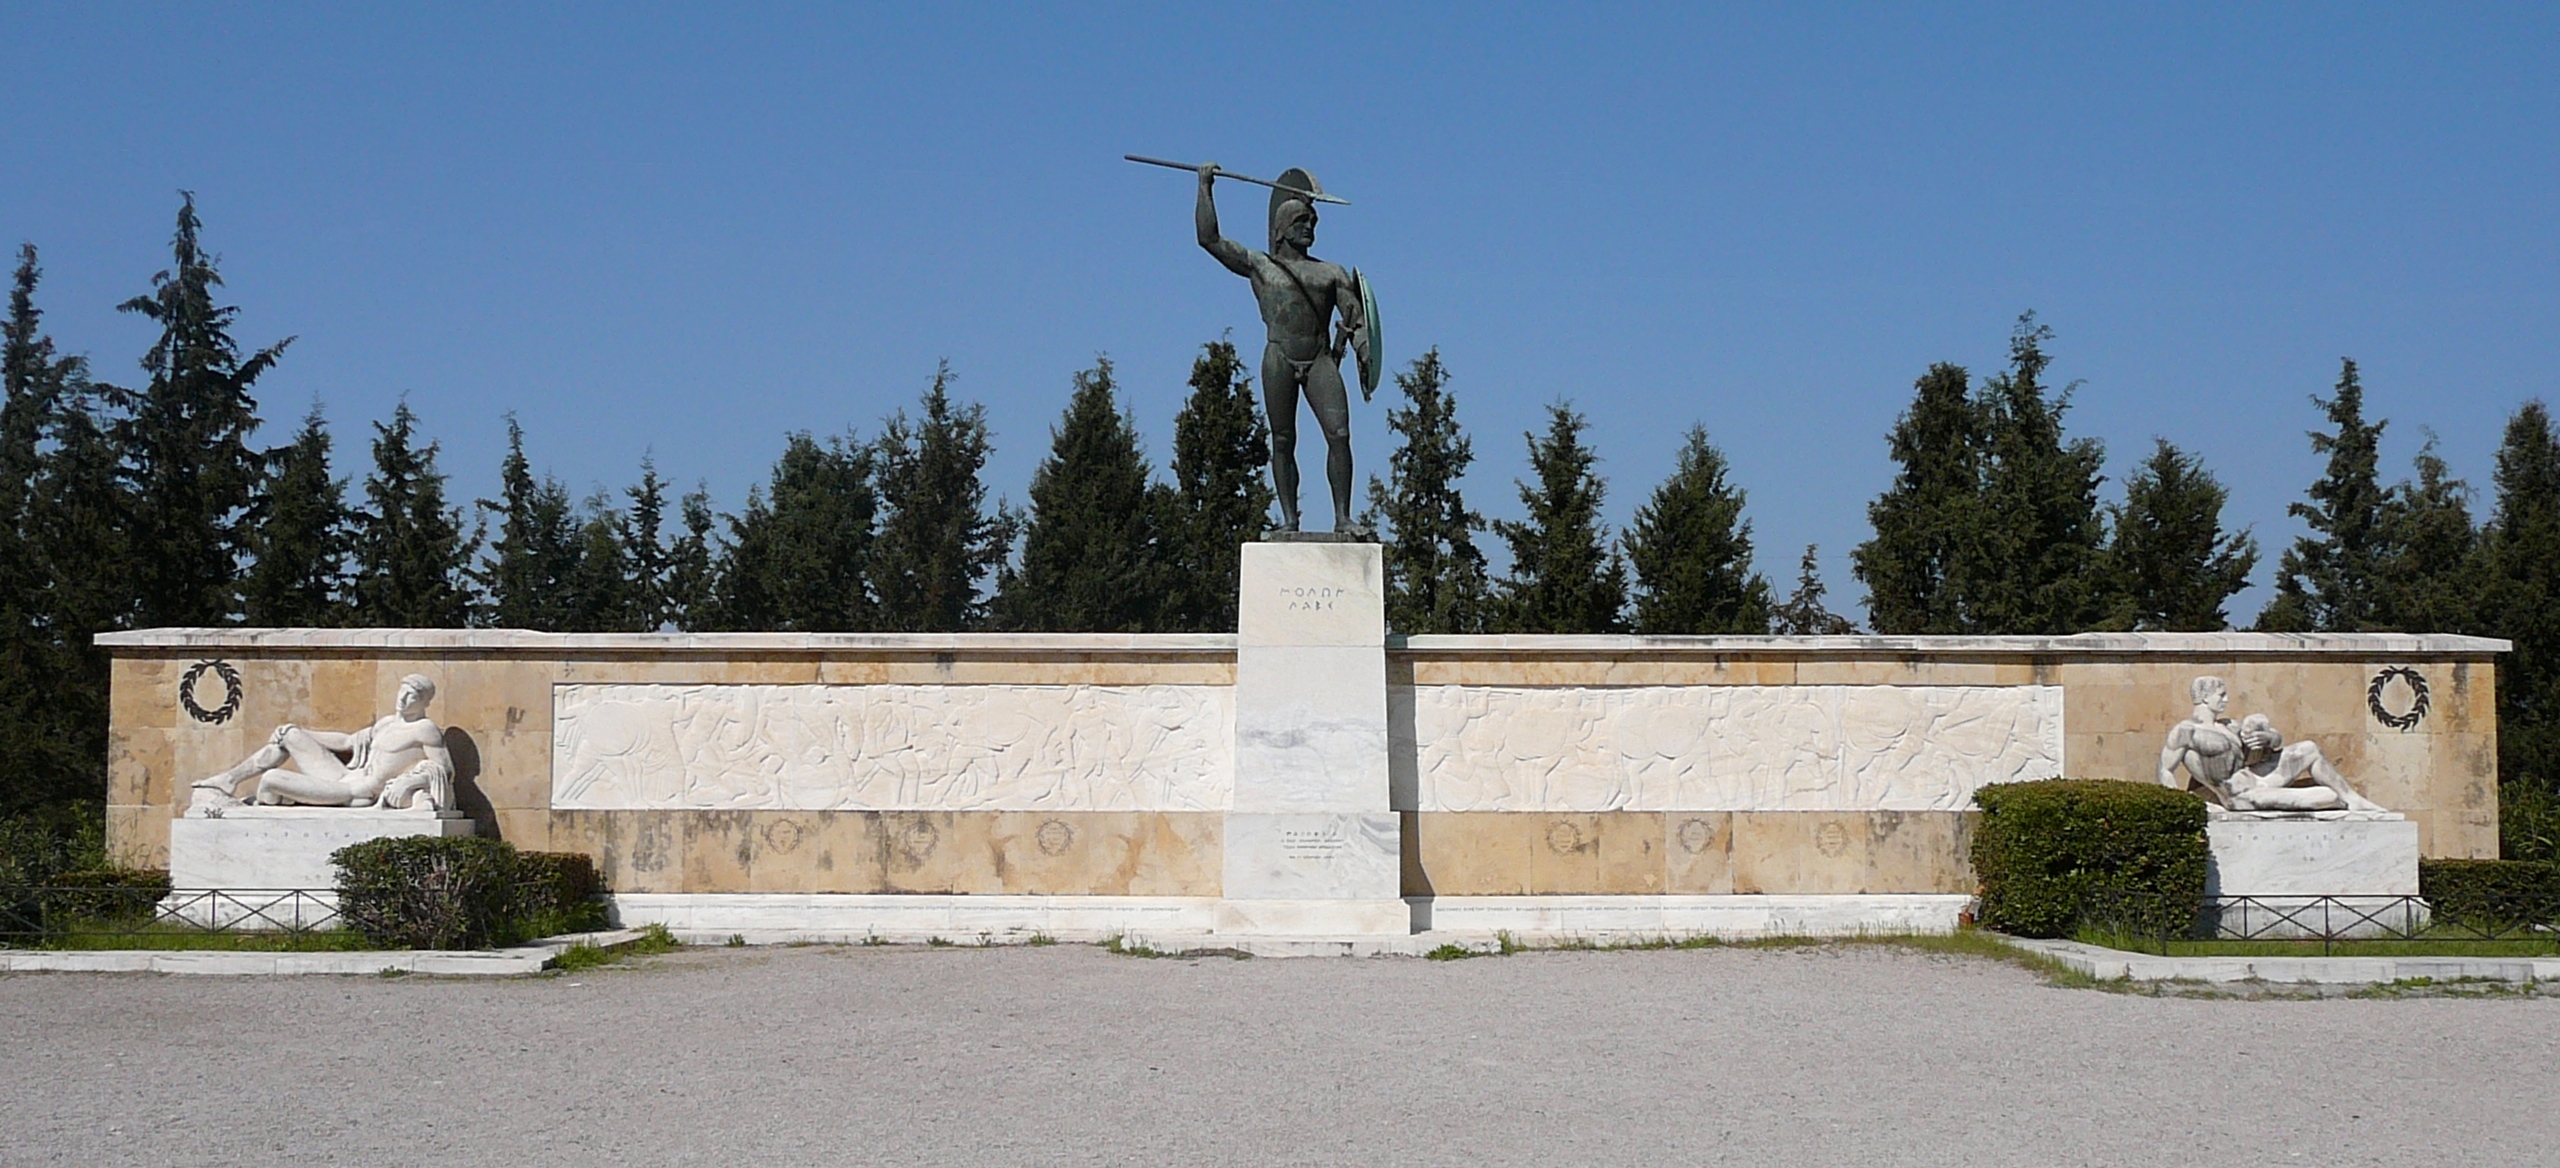 The monument that stands at Thermopylae today (it's not ancient though)